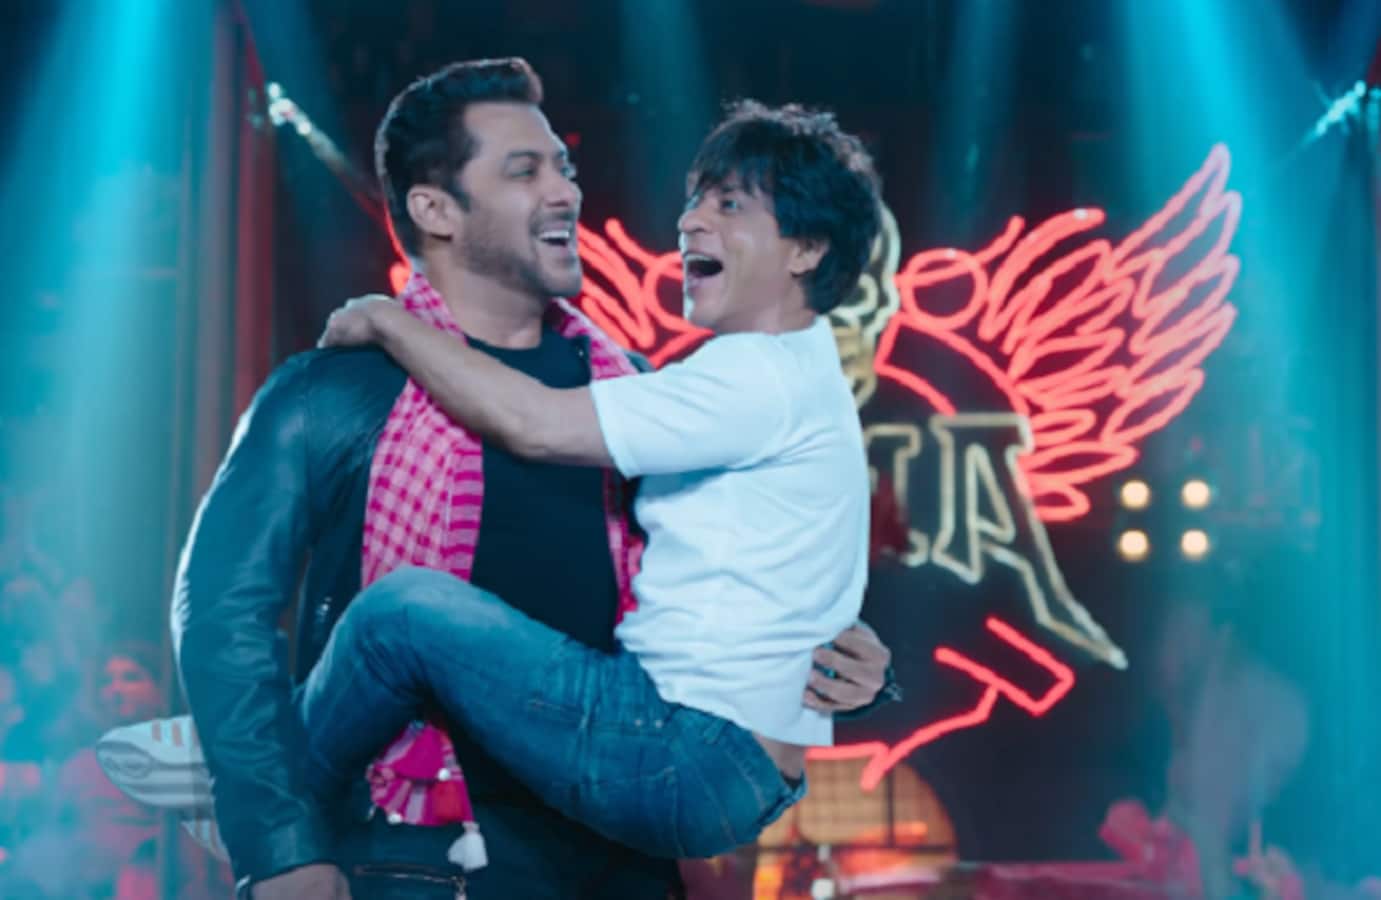 Salman Khan hits a hattrick as teasers of Zero, Loveratri and Yamla Pagla Deewana Phir Se featuring the actor release today